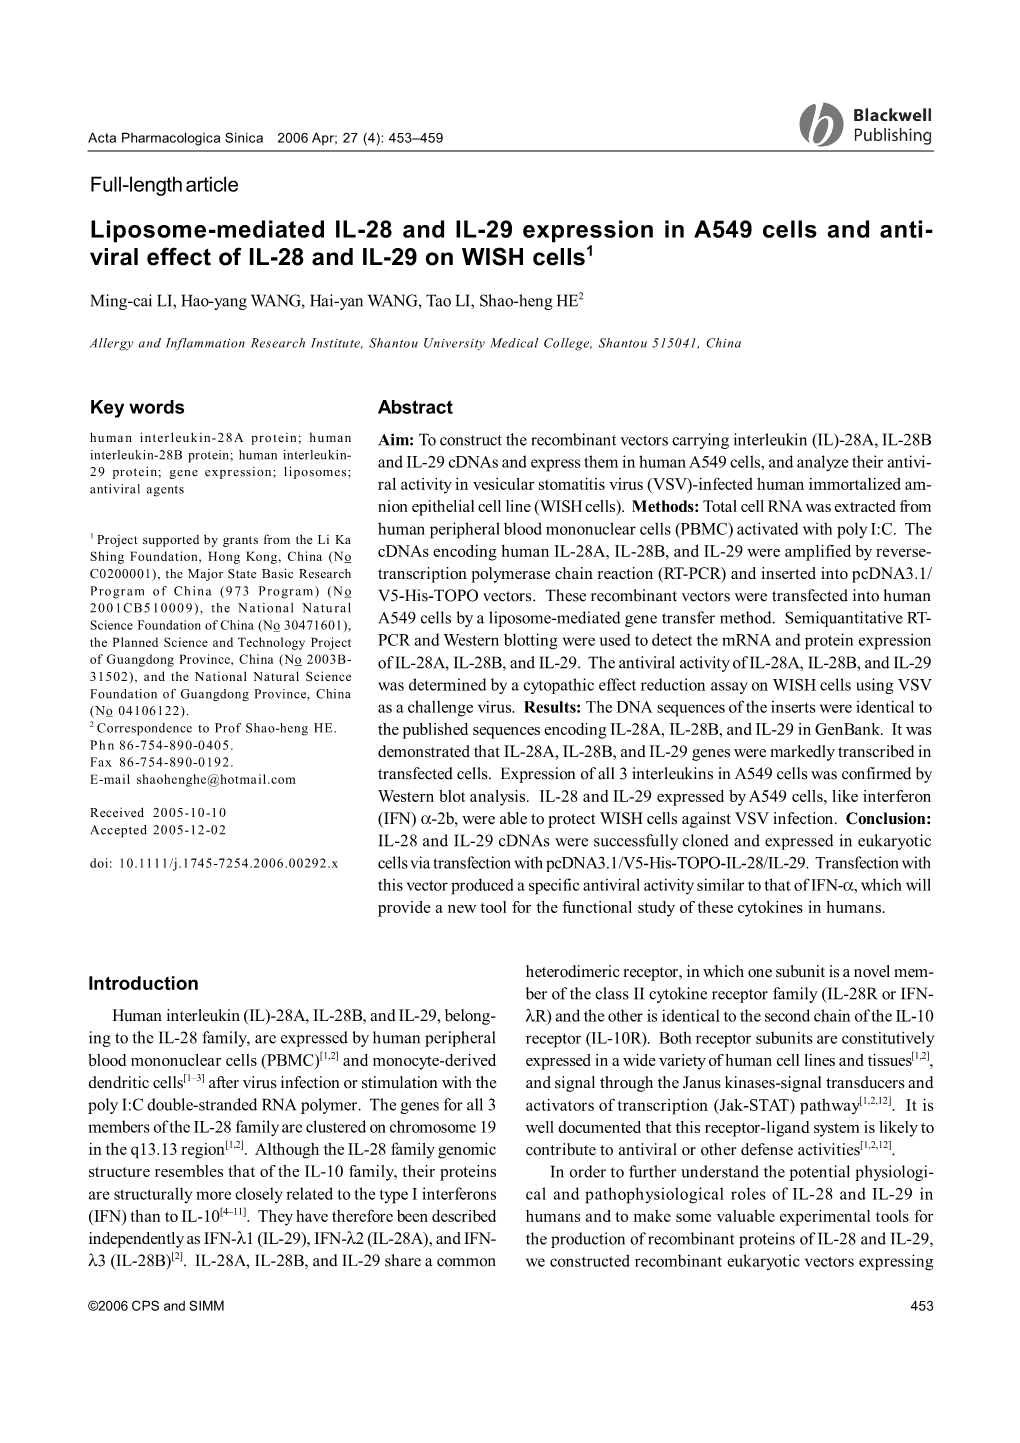 Liposome-Mediated IL-28 and IL-29 Expression in A549 Cells and Anti- Viral Effect of IL-28 and IL-29 on WISH Cells1